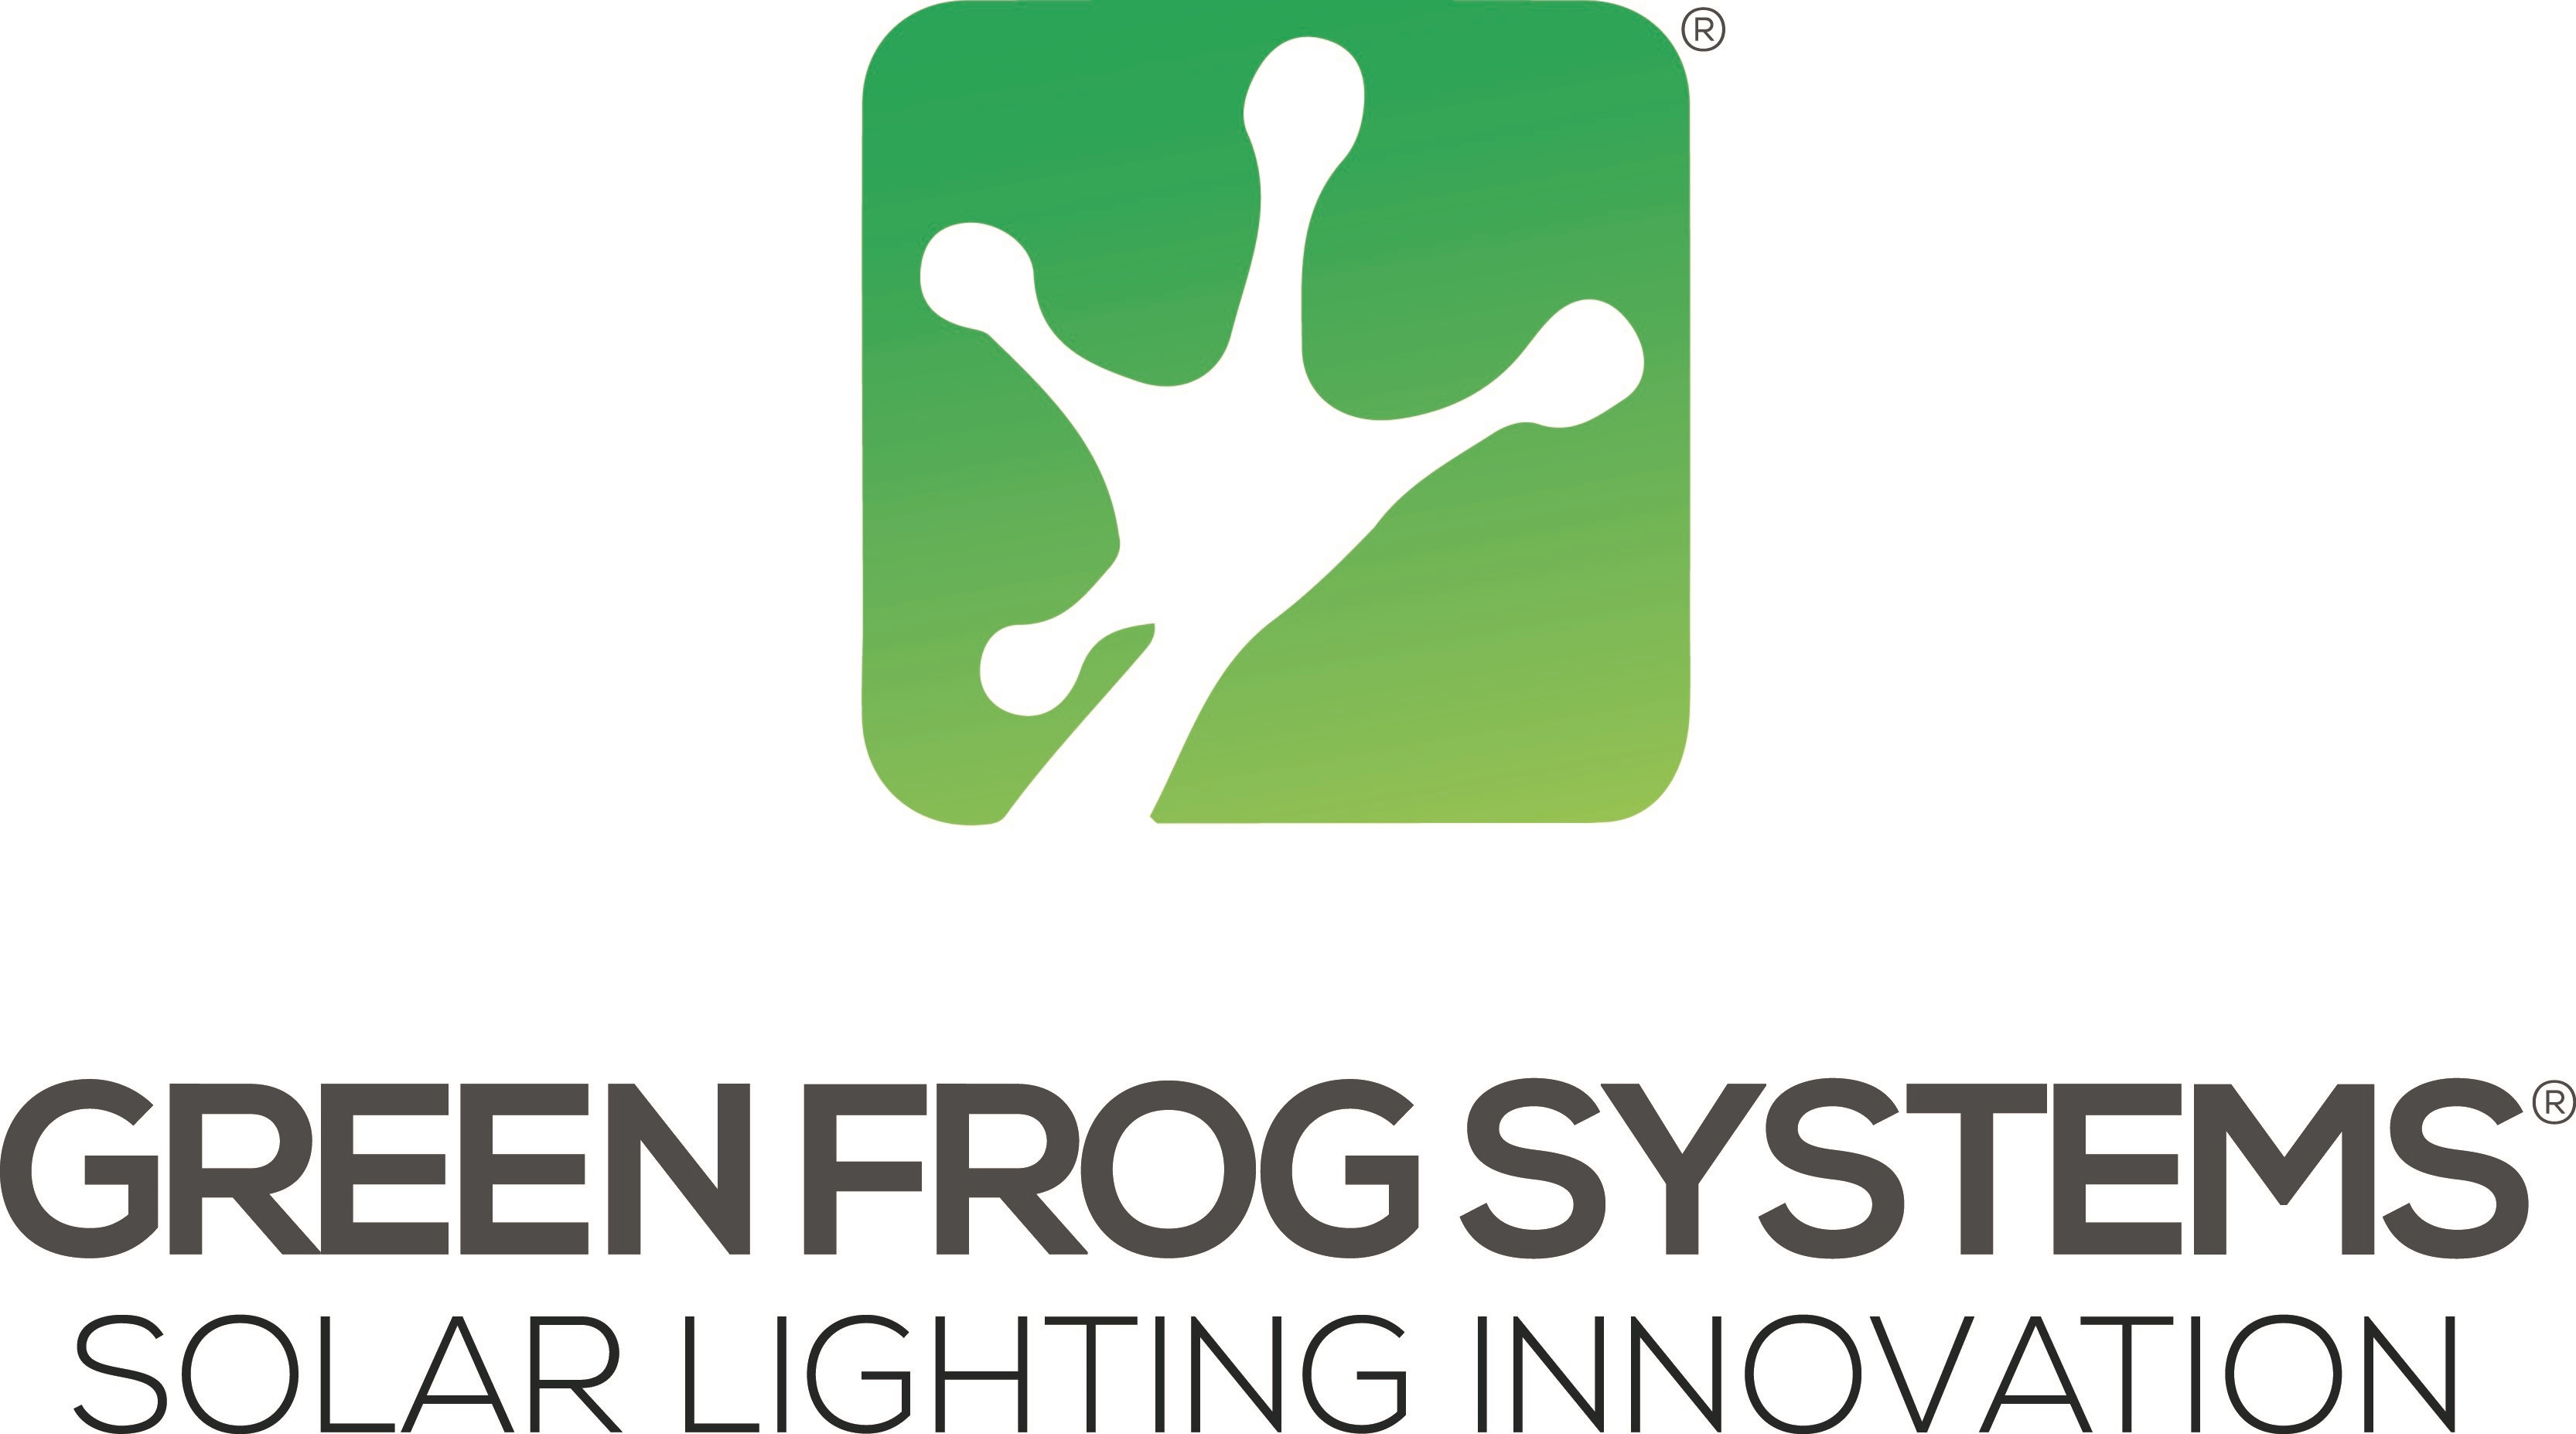 Green Frog Systems